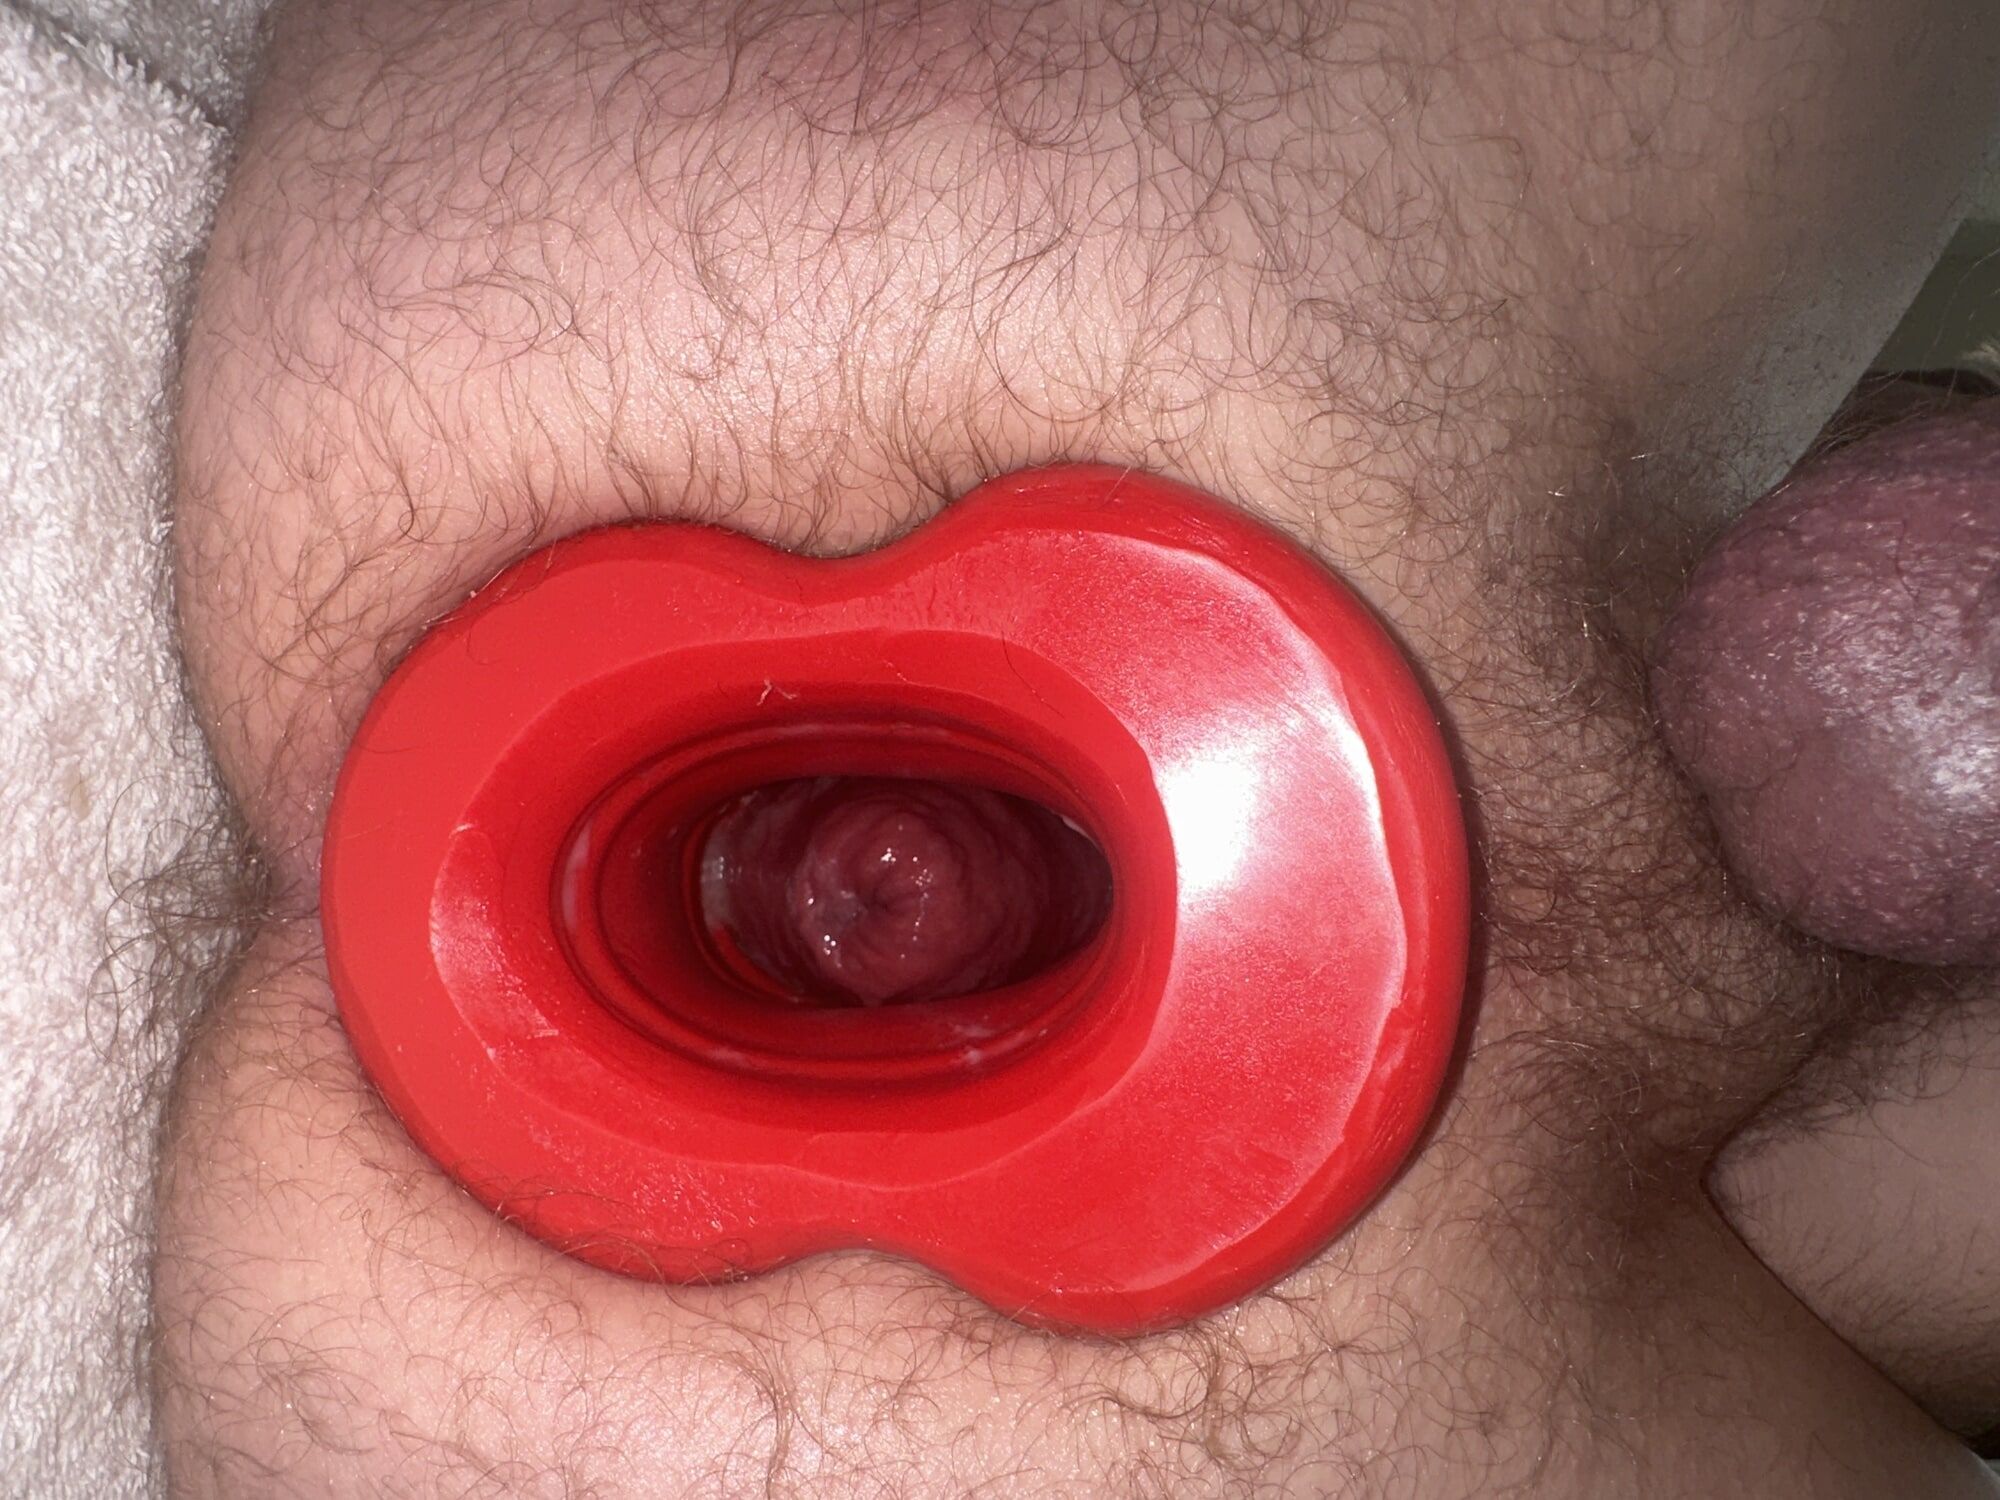 Anal prolapse in oxball ff pighole #5